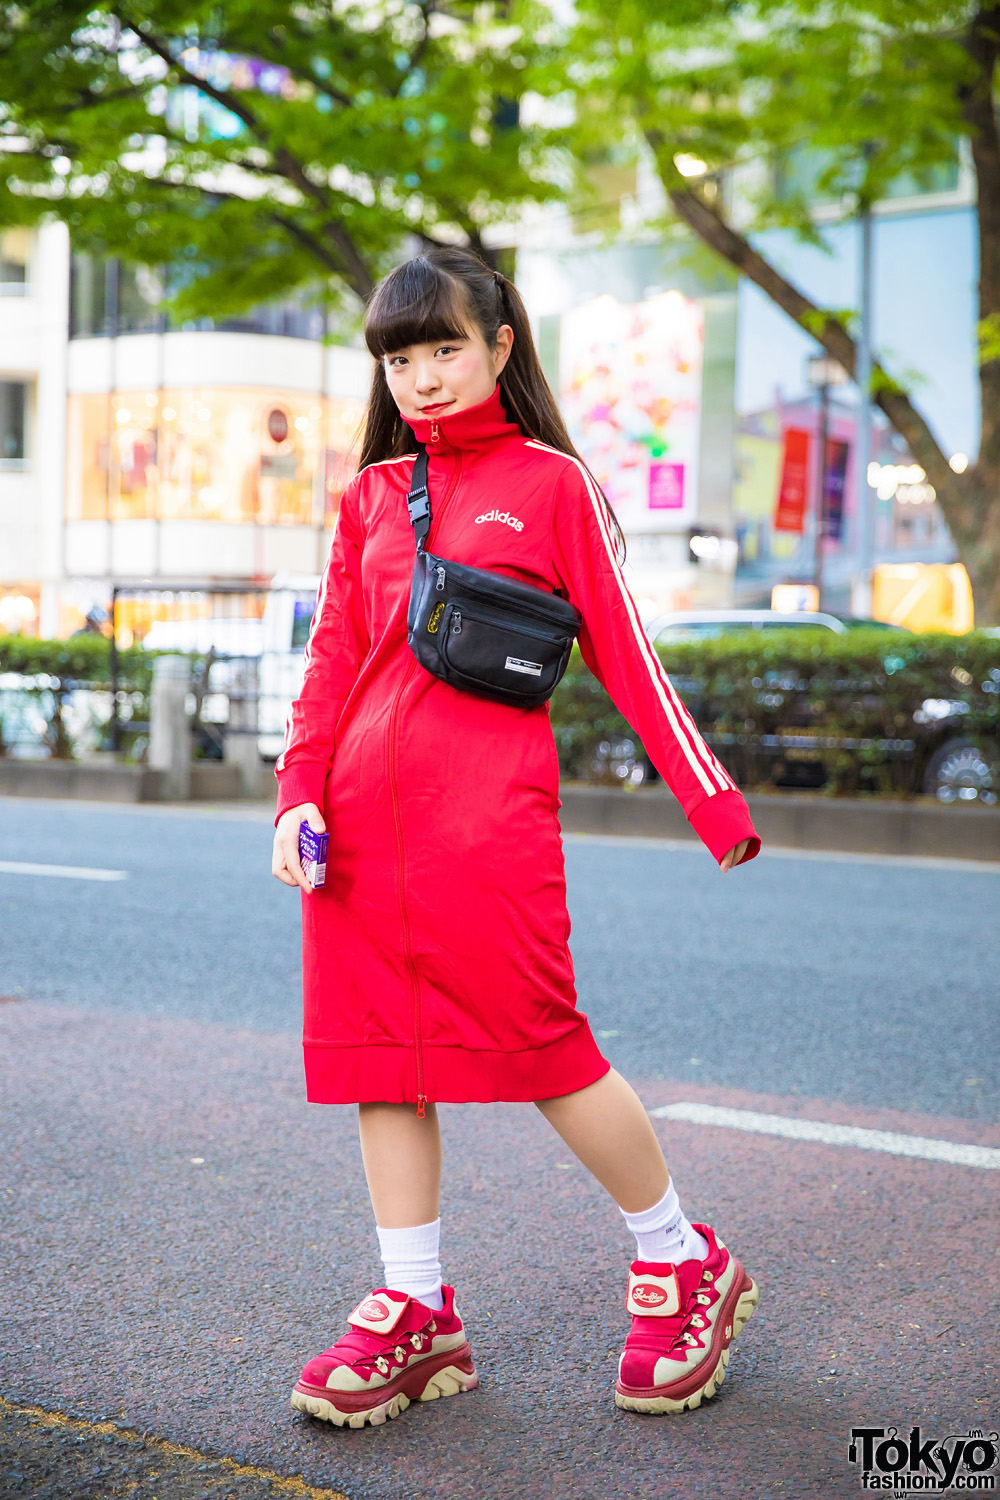 Red Sporty Harajuku Street Style in Adidas Zip-Up Dress, RRR Show Room Sneakers & Belt Bag